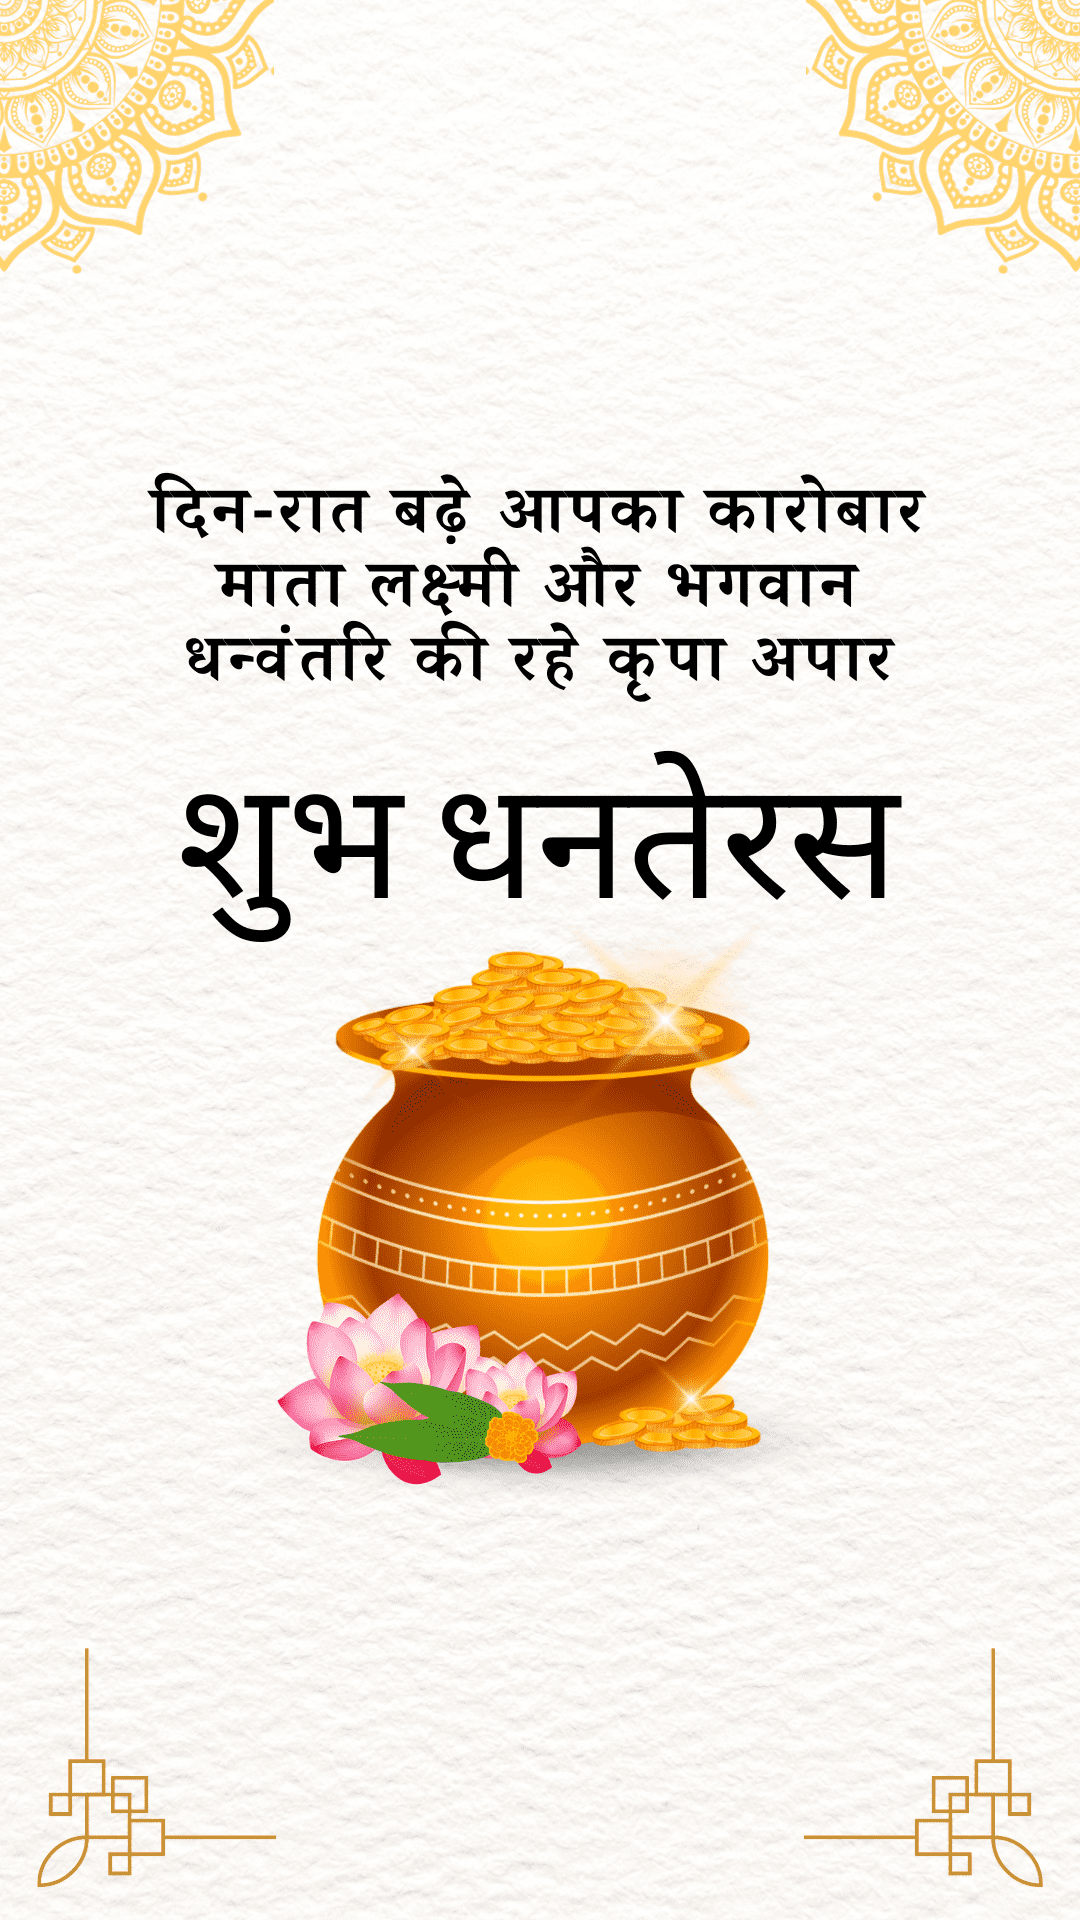 #{"id":2572,"_id":null,"name":"dhanteras-quotes-in-hindi","count":0,"data":null,"deleted_at":null,"created_at":"2023-09-14T10:16:11.000000Z","updated_at":"2023-09-14T10:16:11.000000Z","merge_with":null,"pivot":{"taggable_id":2365,"tag_id":2572,"taggable_type":"App\\Models\\Status"}}, #{"id":2573,"_id":null,"name":"dhanteras-wishes-in-hindi","count":0,"data":null,"deleted_at":null,"created_at":"2023-09-14T10:16:11.000000Z","updated_at":"2023-09-14T10:16:11.000000Z","merge_with":null,"pivot":{"taggable_id":2365,"tag_id":2573,"taggable_type":"App\\Models\\Status"}}, #{"id":2574,"_id":null,"name":"happy-dhanteras-status-in-hindi","count":0,"data":null,"deleted_at":null,"created_at":"2023-09-14T10:16:11.000000Z","updated_at":"2023-09-14T10:16:11.000000Z","merge_with":null,"pivot":{"taggable_id":2365,"tag_id":2574,"taggable_type":"App\\Models\\Status"}}, #{"id":240,"_id":"61f3f785e0f744570541c11f","name":"dhanteras-shayari","count":7,"data":"{\"_id\":{\"$oid\":\"61f3f785e0f744570541c11f\"},\"id\":\"214\",\"name\":\"dhanteras-shayari\",\"created_at\":\"2020-11-09-16:30:19\",\"updated_at\":\"2020-11-09-16:30:19\",\"updatedAt\":{\"$date\":\"2022-01-28T14:33:44.889Z\"},\"count\":7}","deleted_at":null,"created_at":"2020-11-09T04:30:19.000000Z","updated_at":"2020-11-09T04:30:19.000000Z","merge_with":null,"pivot":{"taggable_id":2365,"tag_id":240,"taggable_type":"App\\Models\\Status"}}